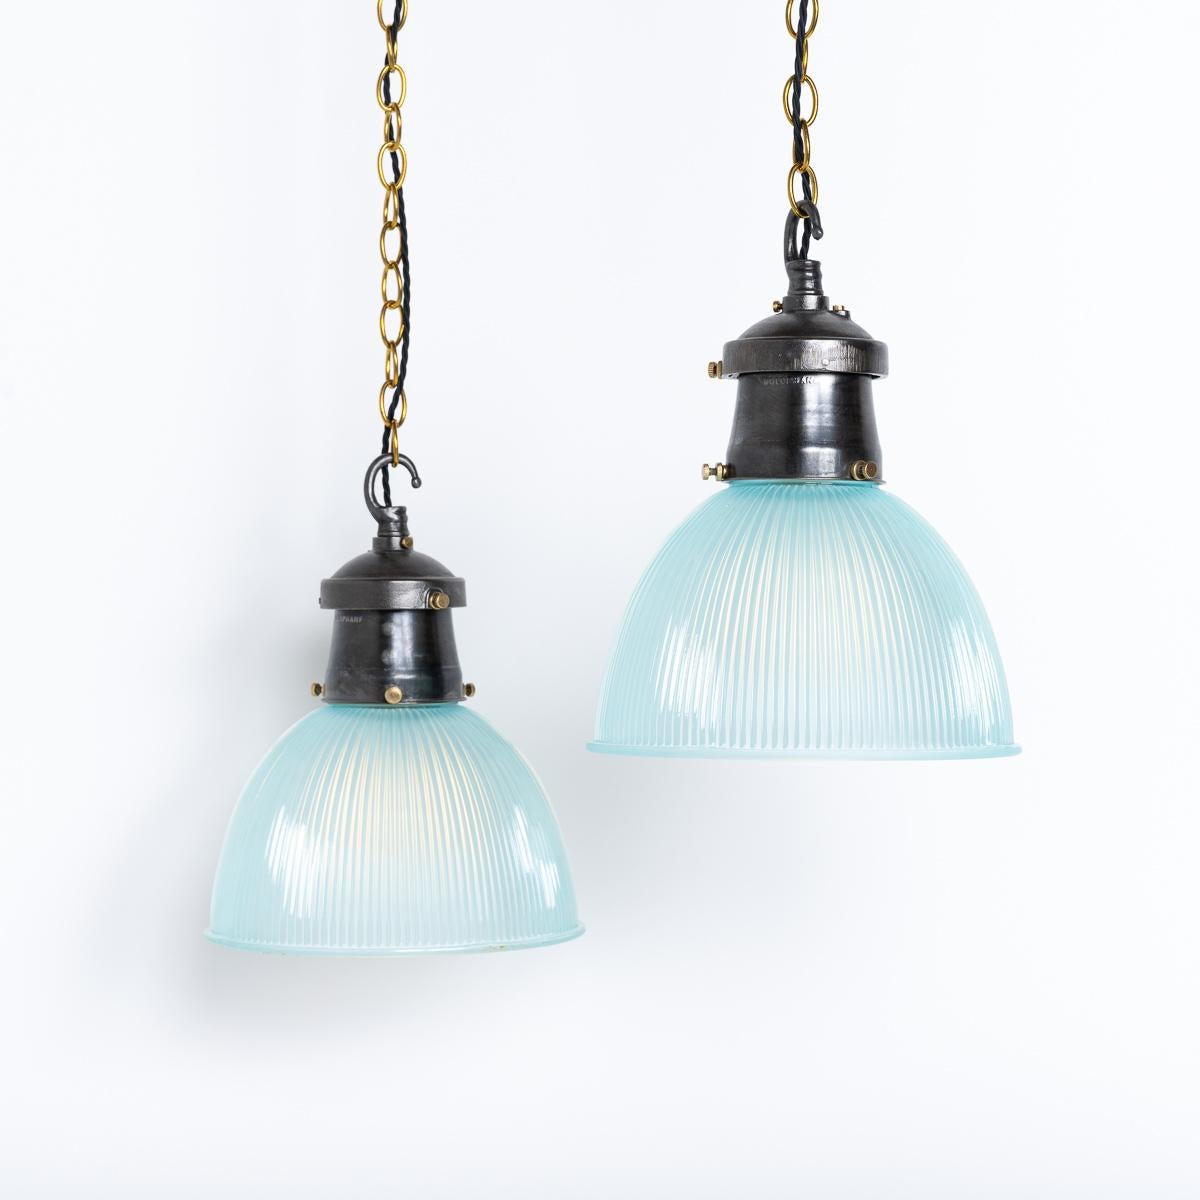 BLUE TINTED HOLOPHANE PRISMATIC FACTORY LIGHTS

Rare and stunning blue Holophane prismatic glass shades with industrial cast iron fittings and brass holding screws.

Reclaimed from an old industrial mill these shades were made in England circa